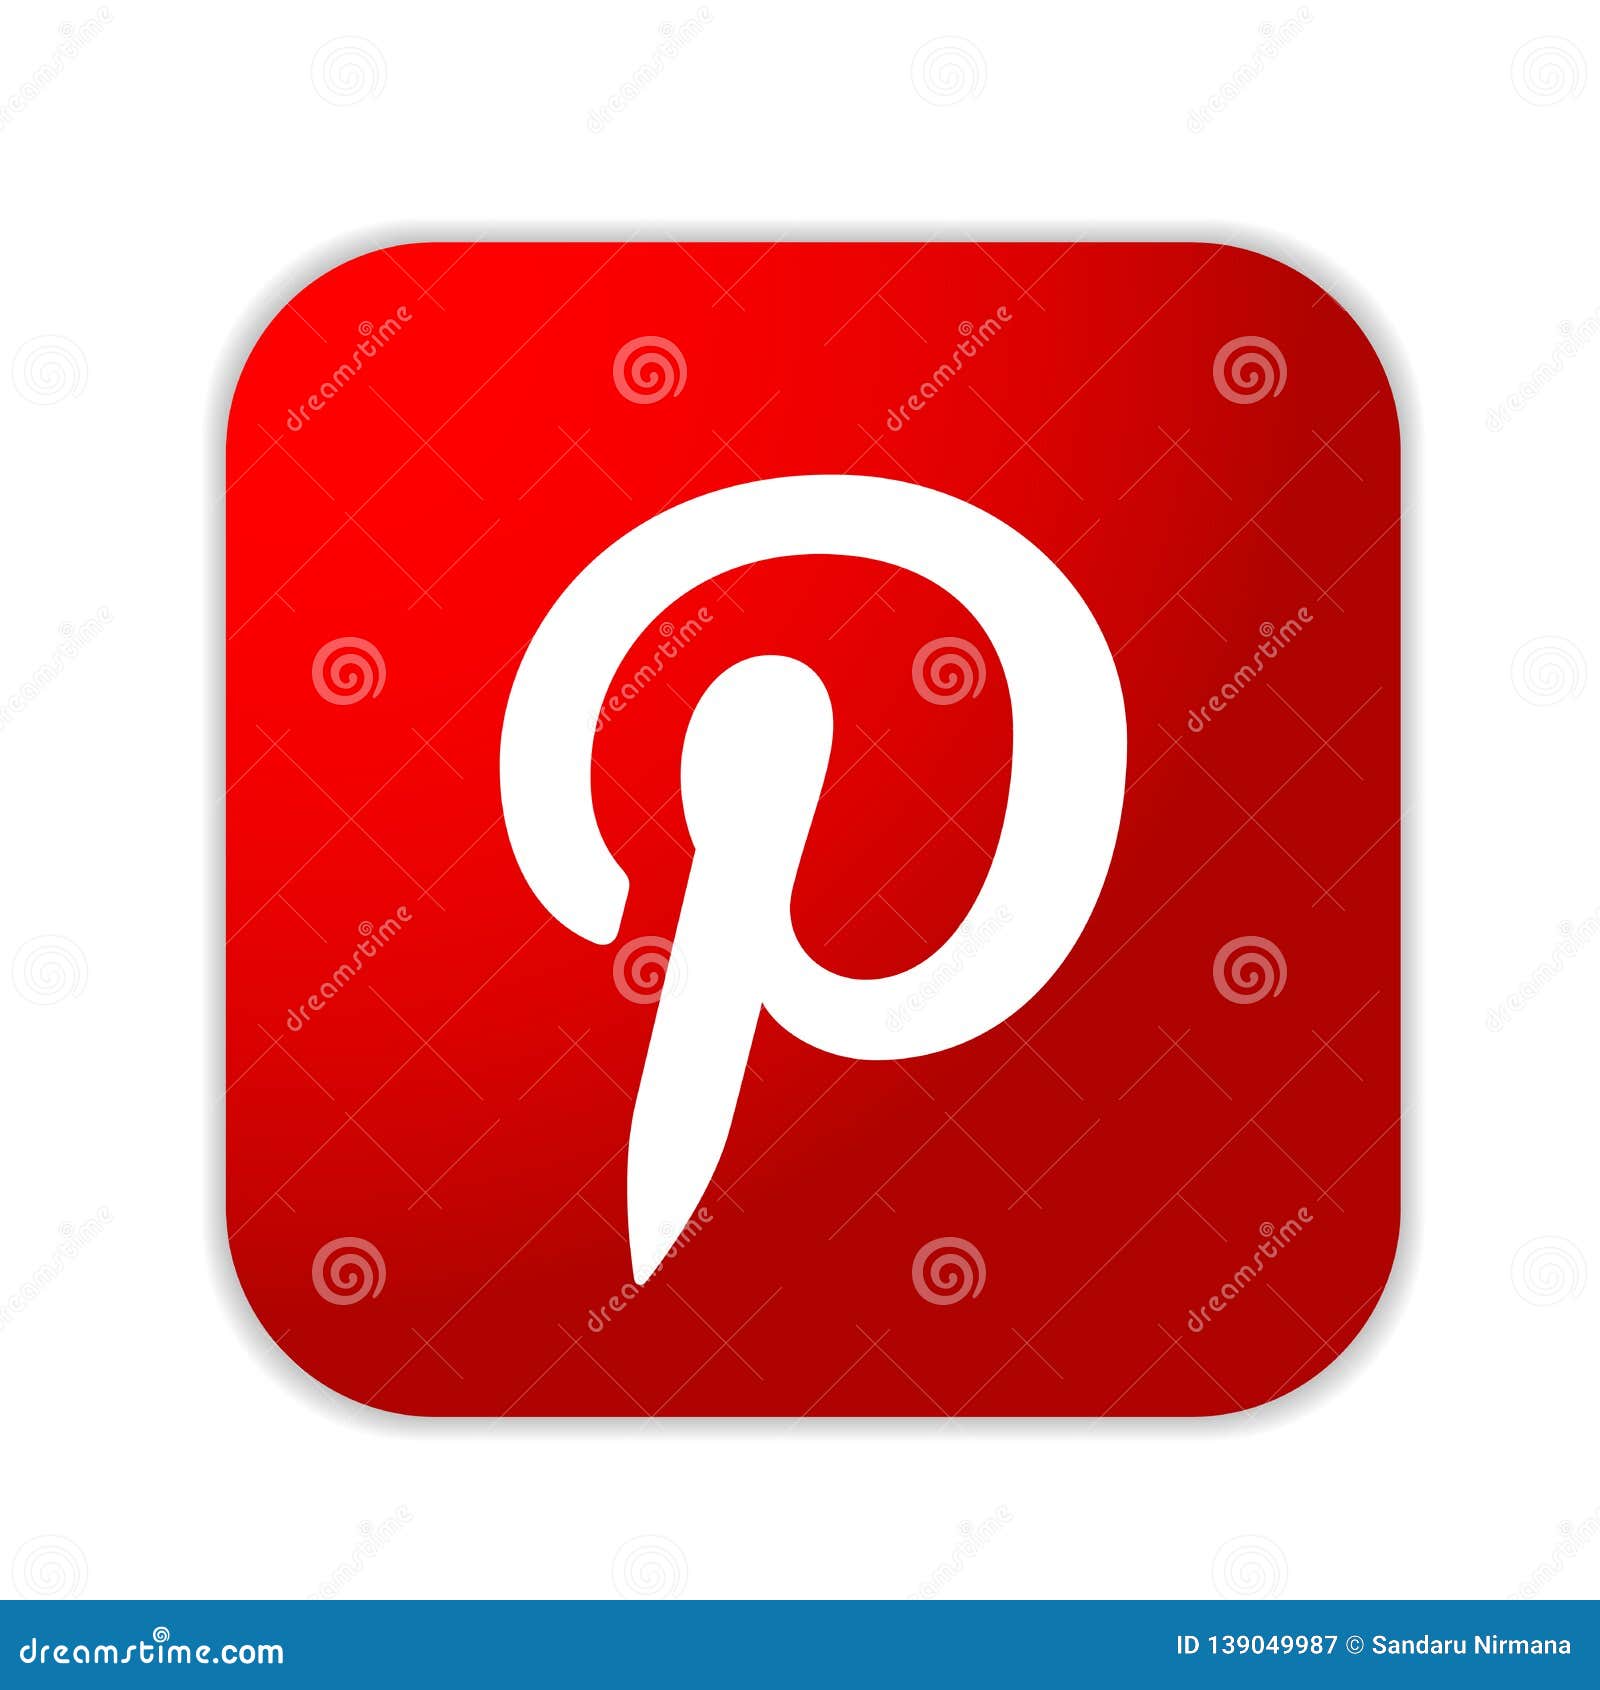 Pinterest Logo Icon in Red Social Media Icon Element Vector on White  Background Editorial Photography - Illustration of background, blogger:  139049987